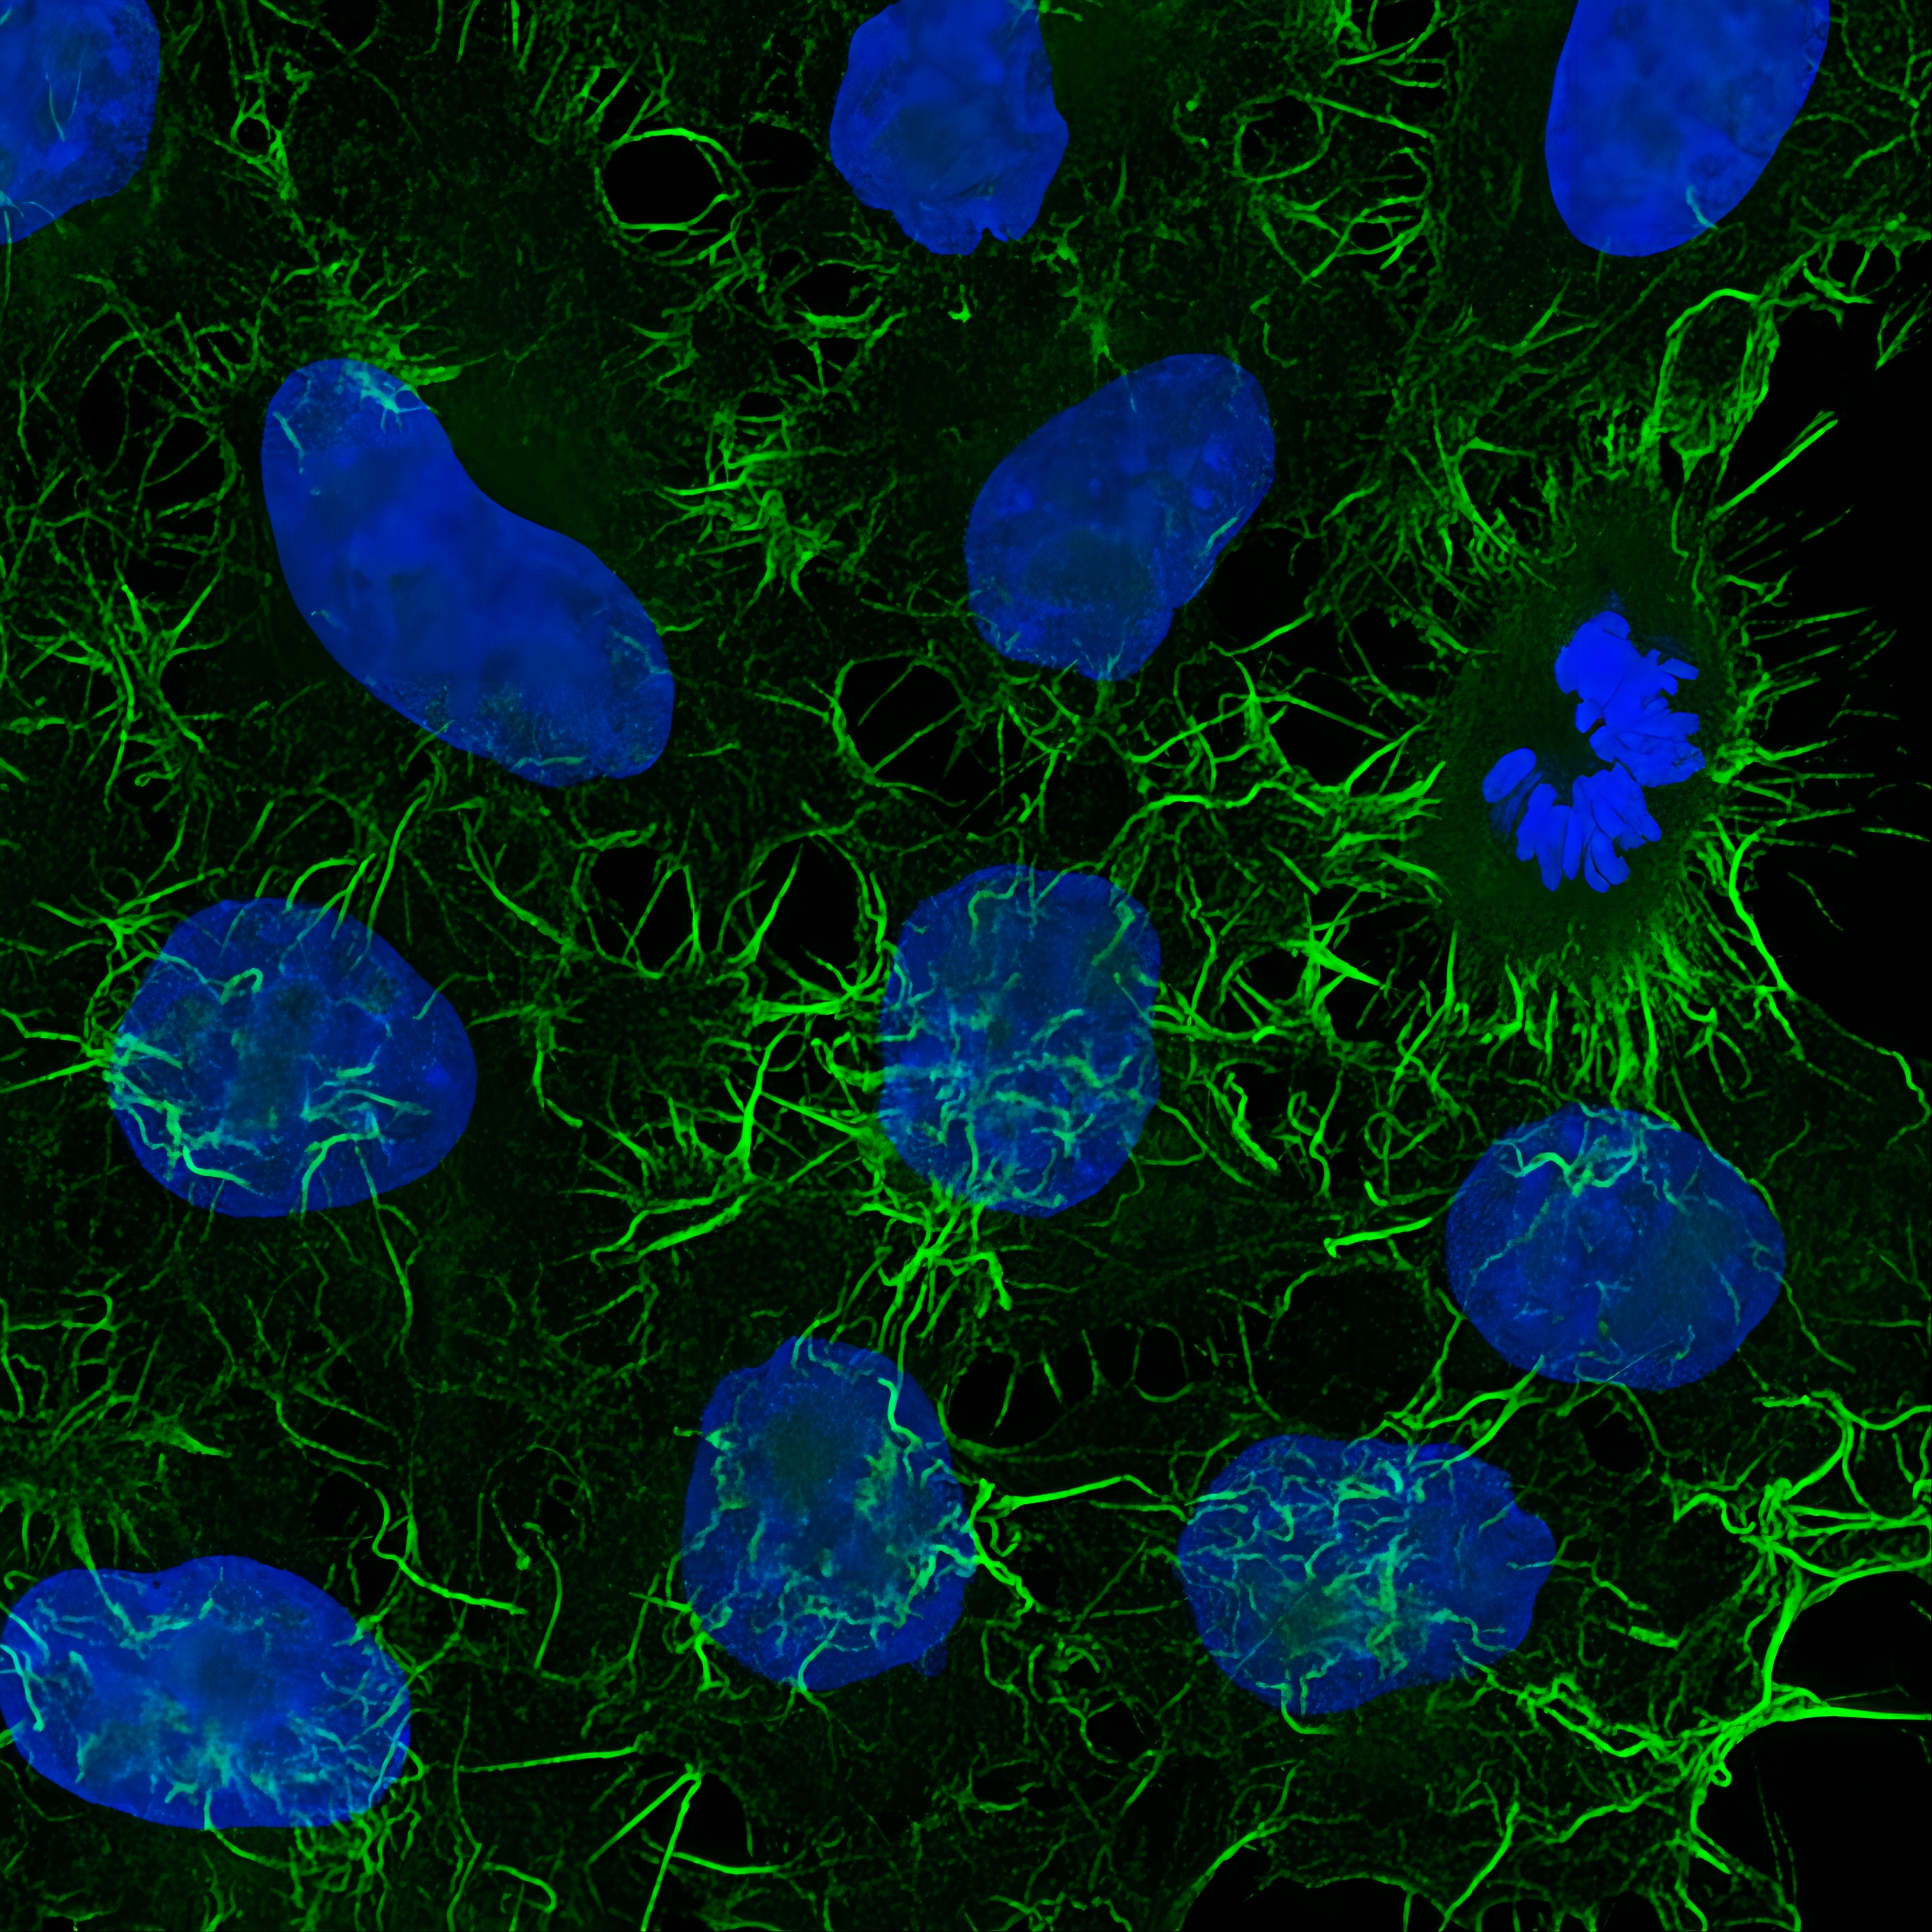 Immunofluorescence analysis of HeLa cells stained with mouse IgG2a anti-Actin antibody and Nano-Secondary® alpaca anti-mouse IgG2a, recombinant VHH, CoraLite® Plus 488 (green) Nuclei were stained with DAPI (blue). Images were recorded at the Core Facility Bioimaging at the Biomedical Center, LMU Munich.